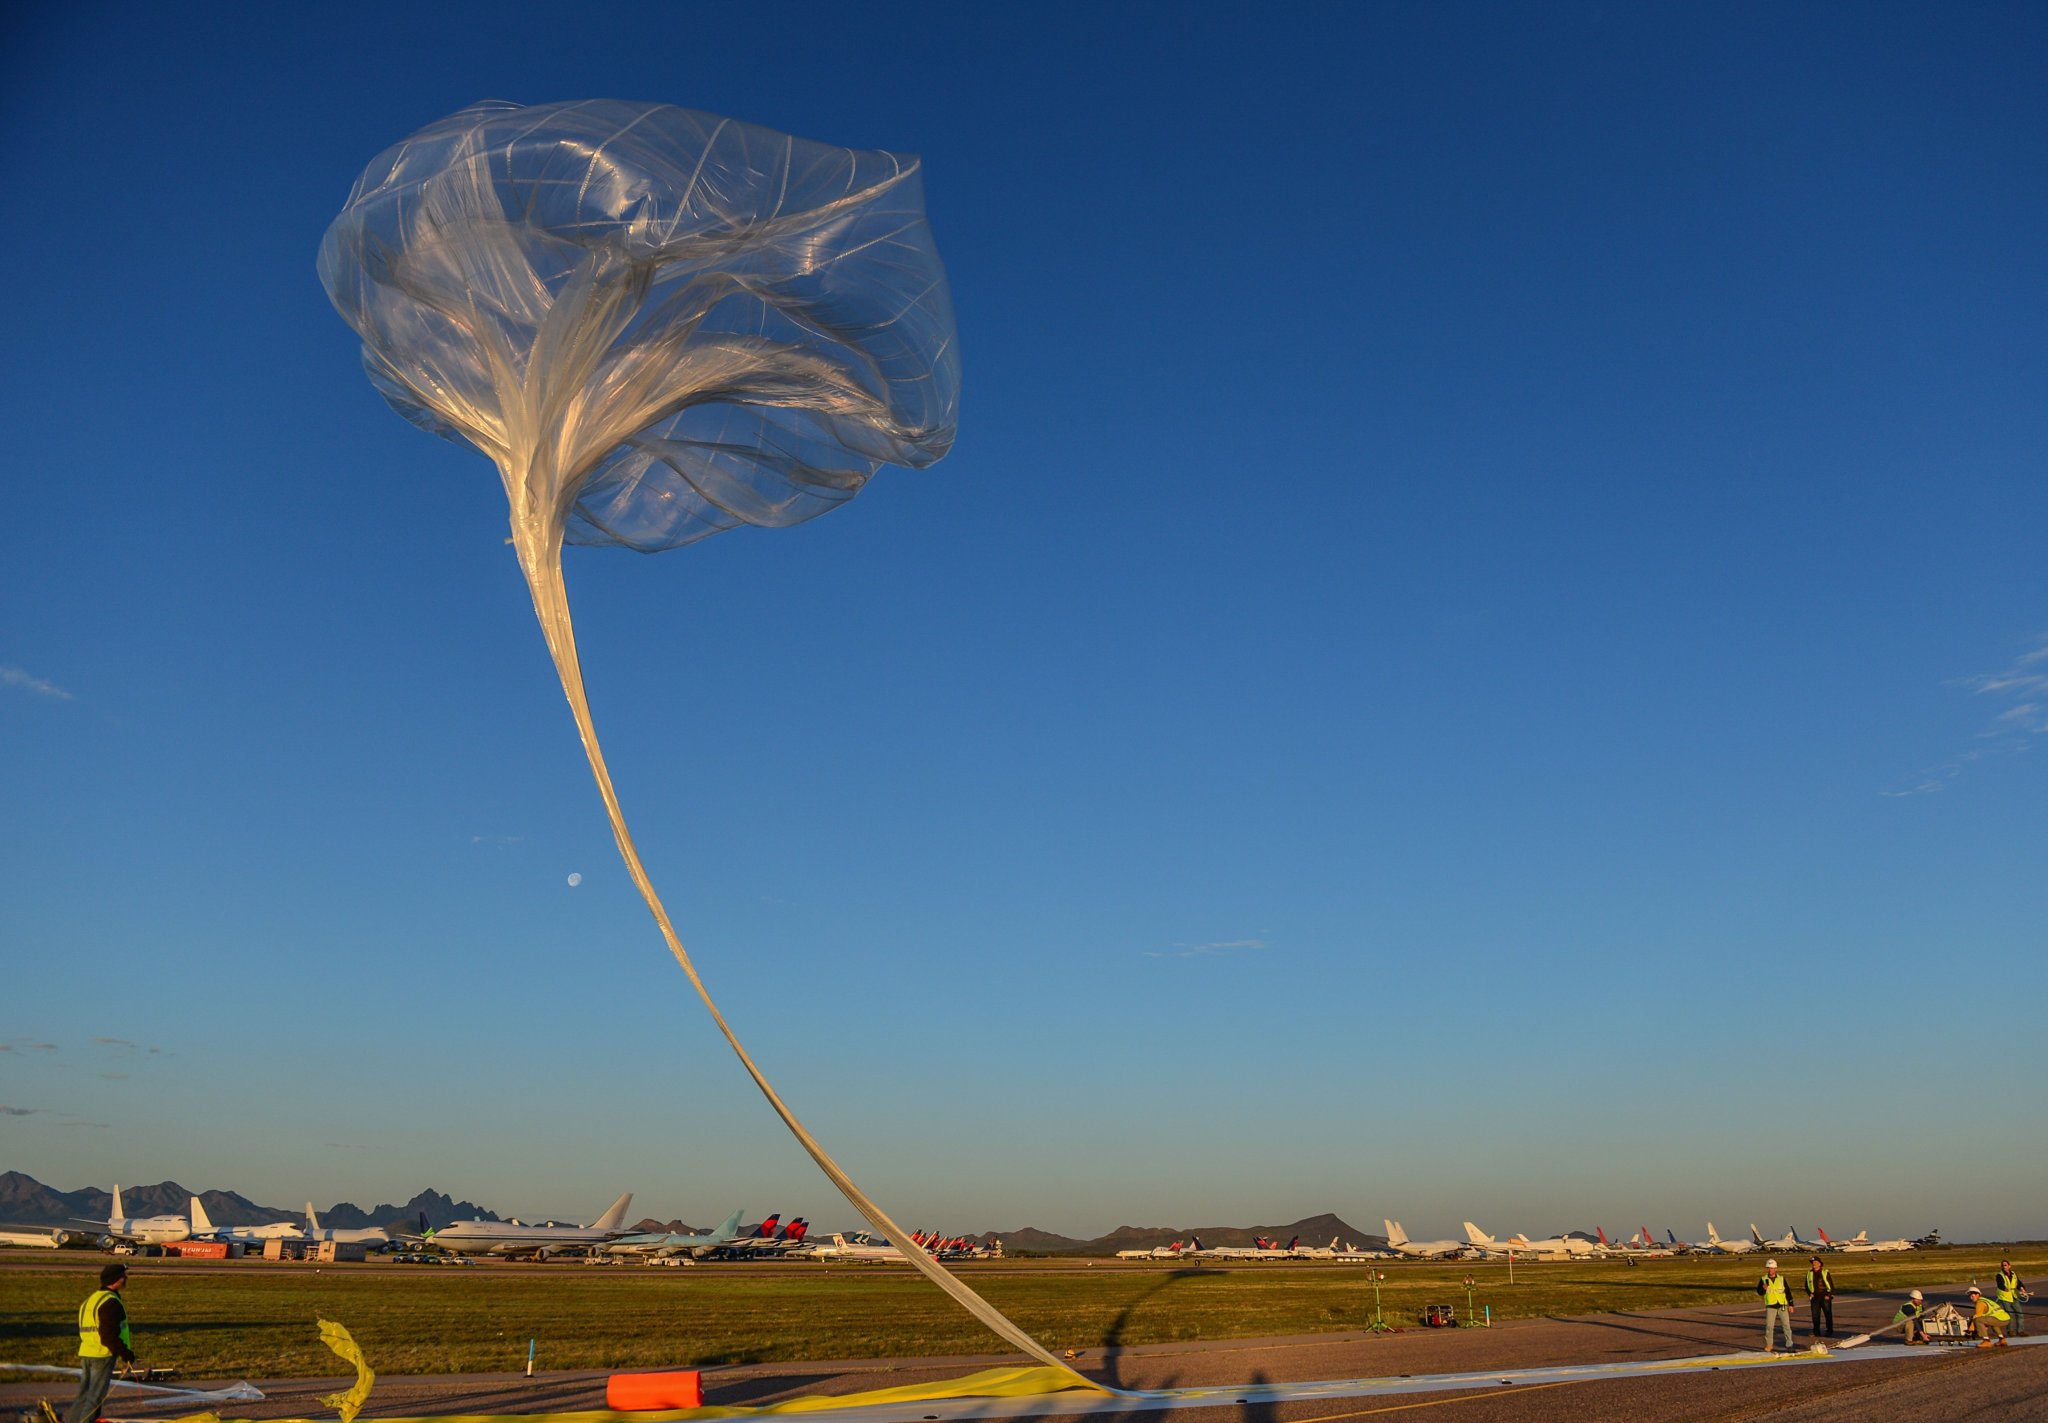 NASA fund's flight on Arizona's World View Balloon carrying experiments to a near space environment.